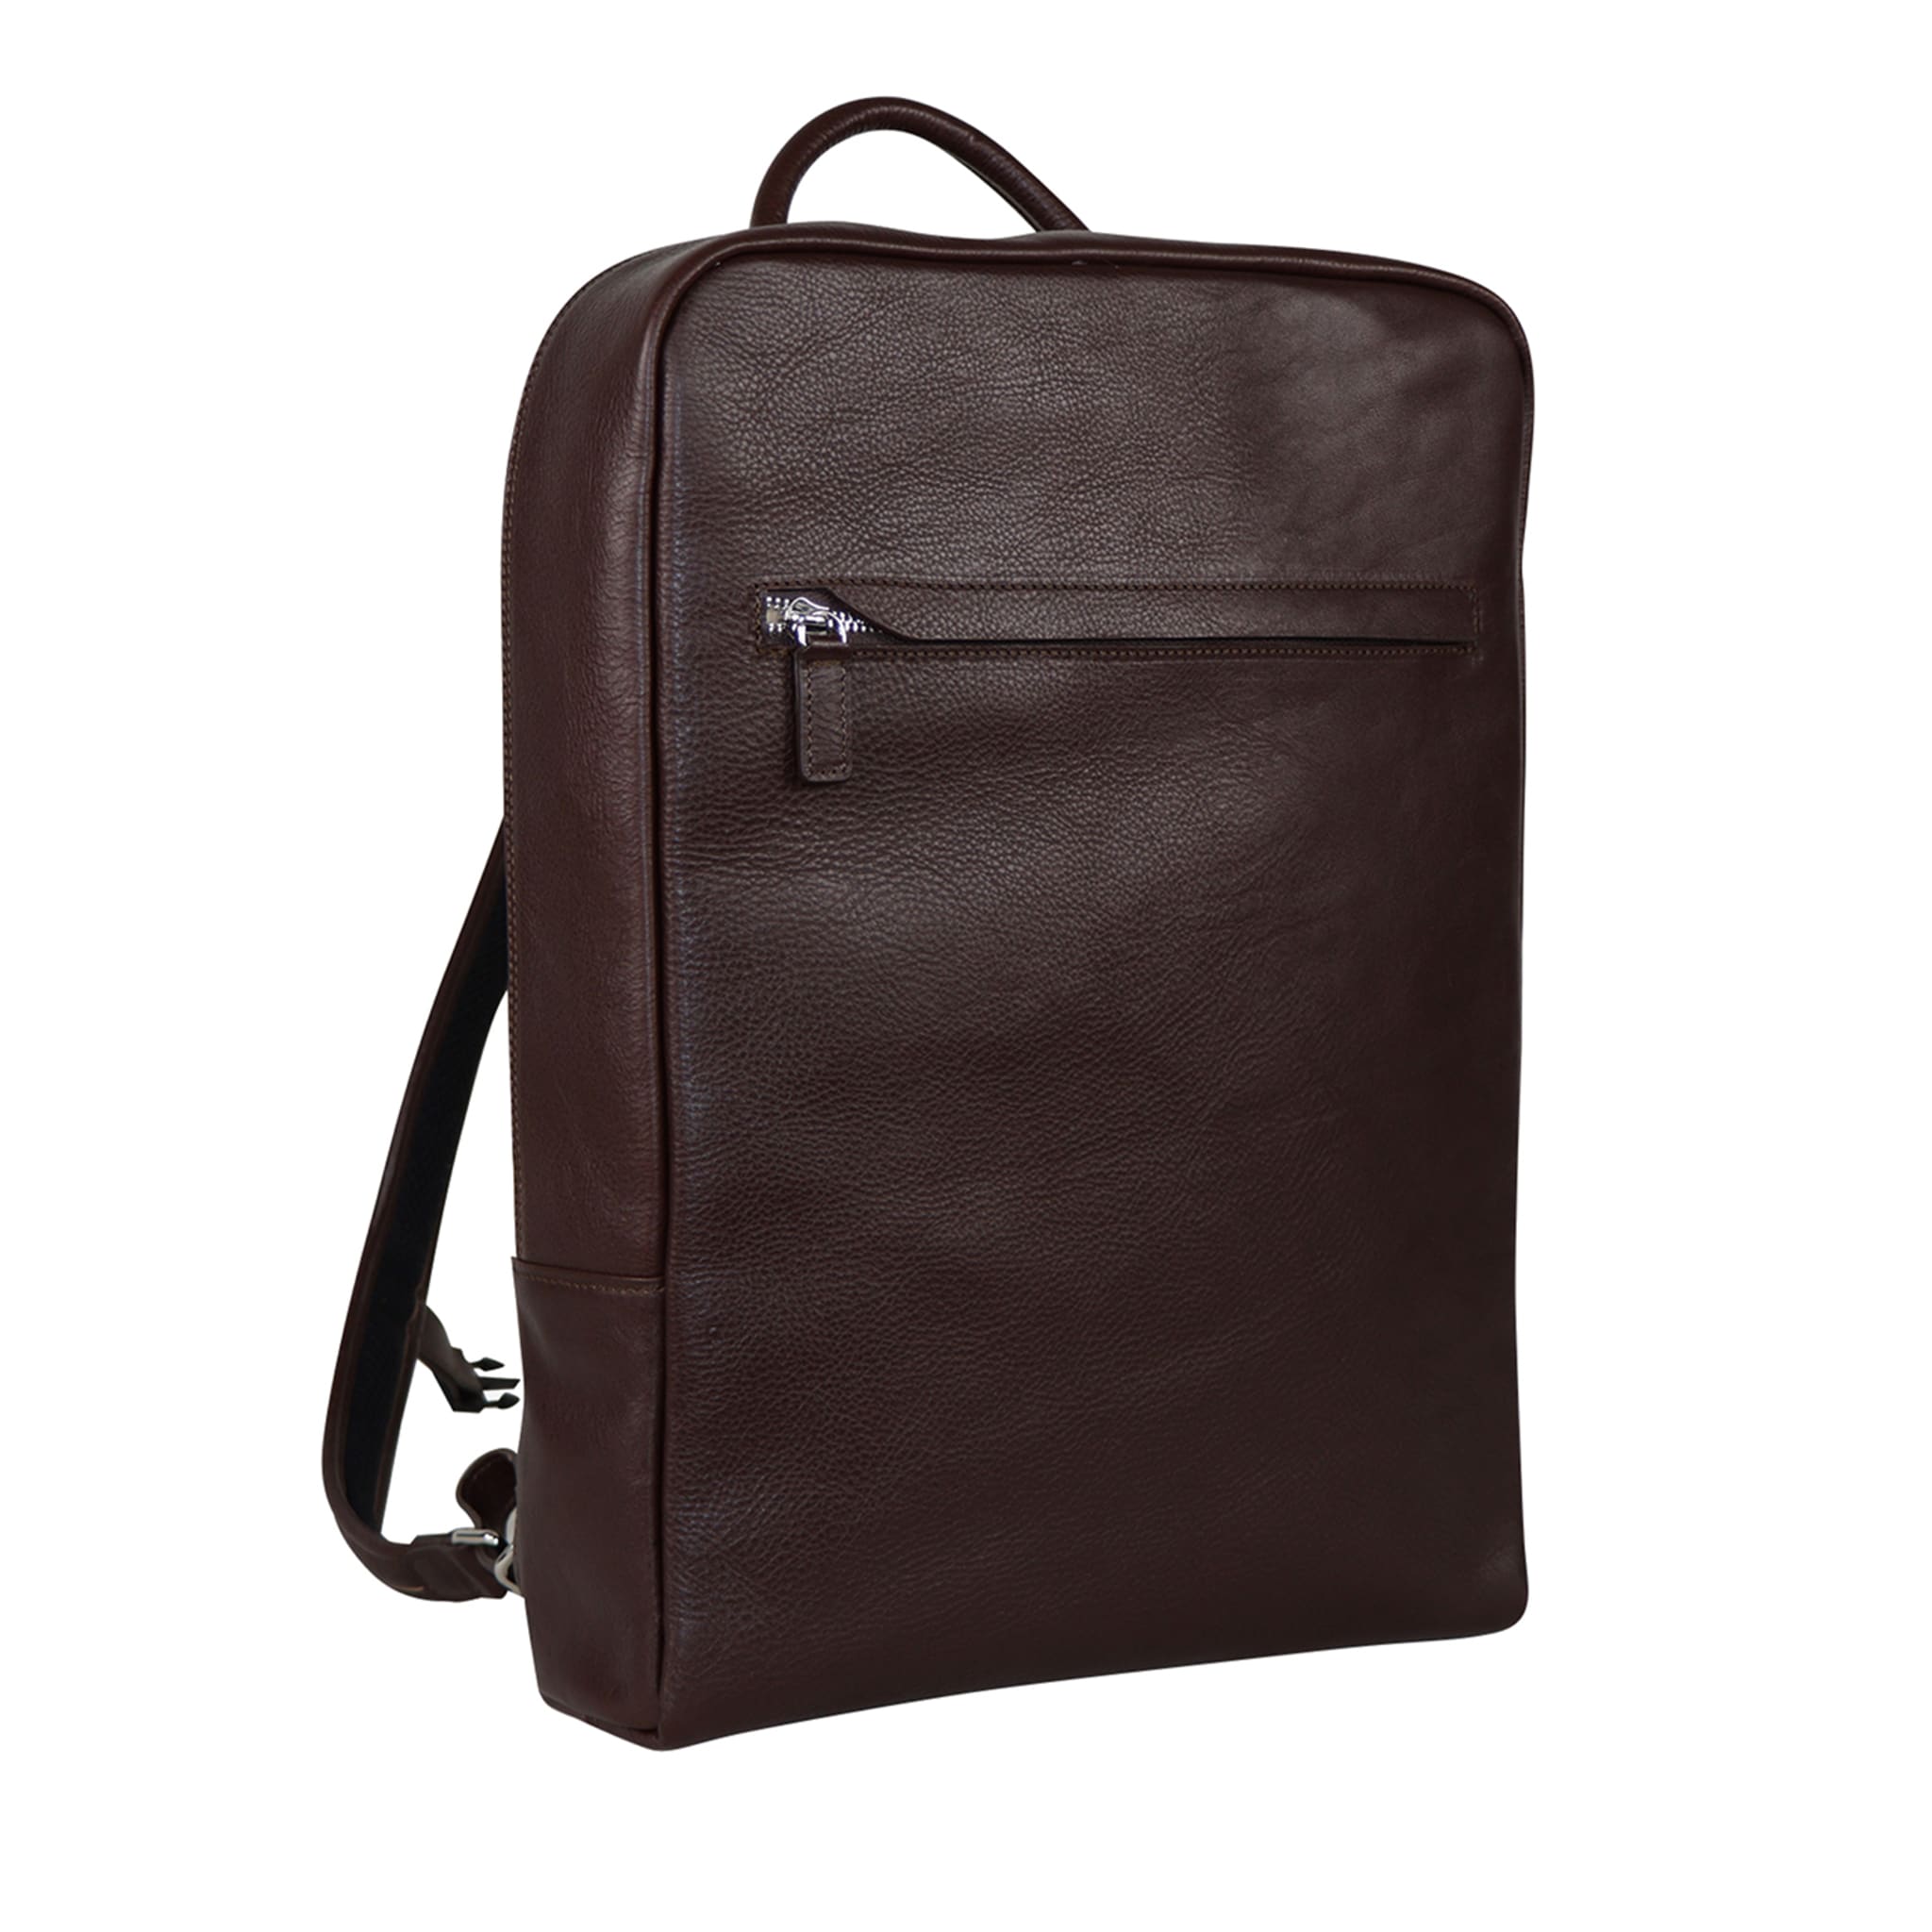 Classic Brown Laptop Backpack - Main view